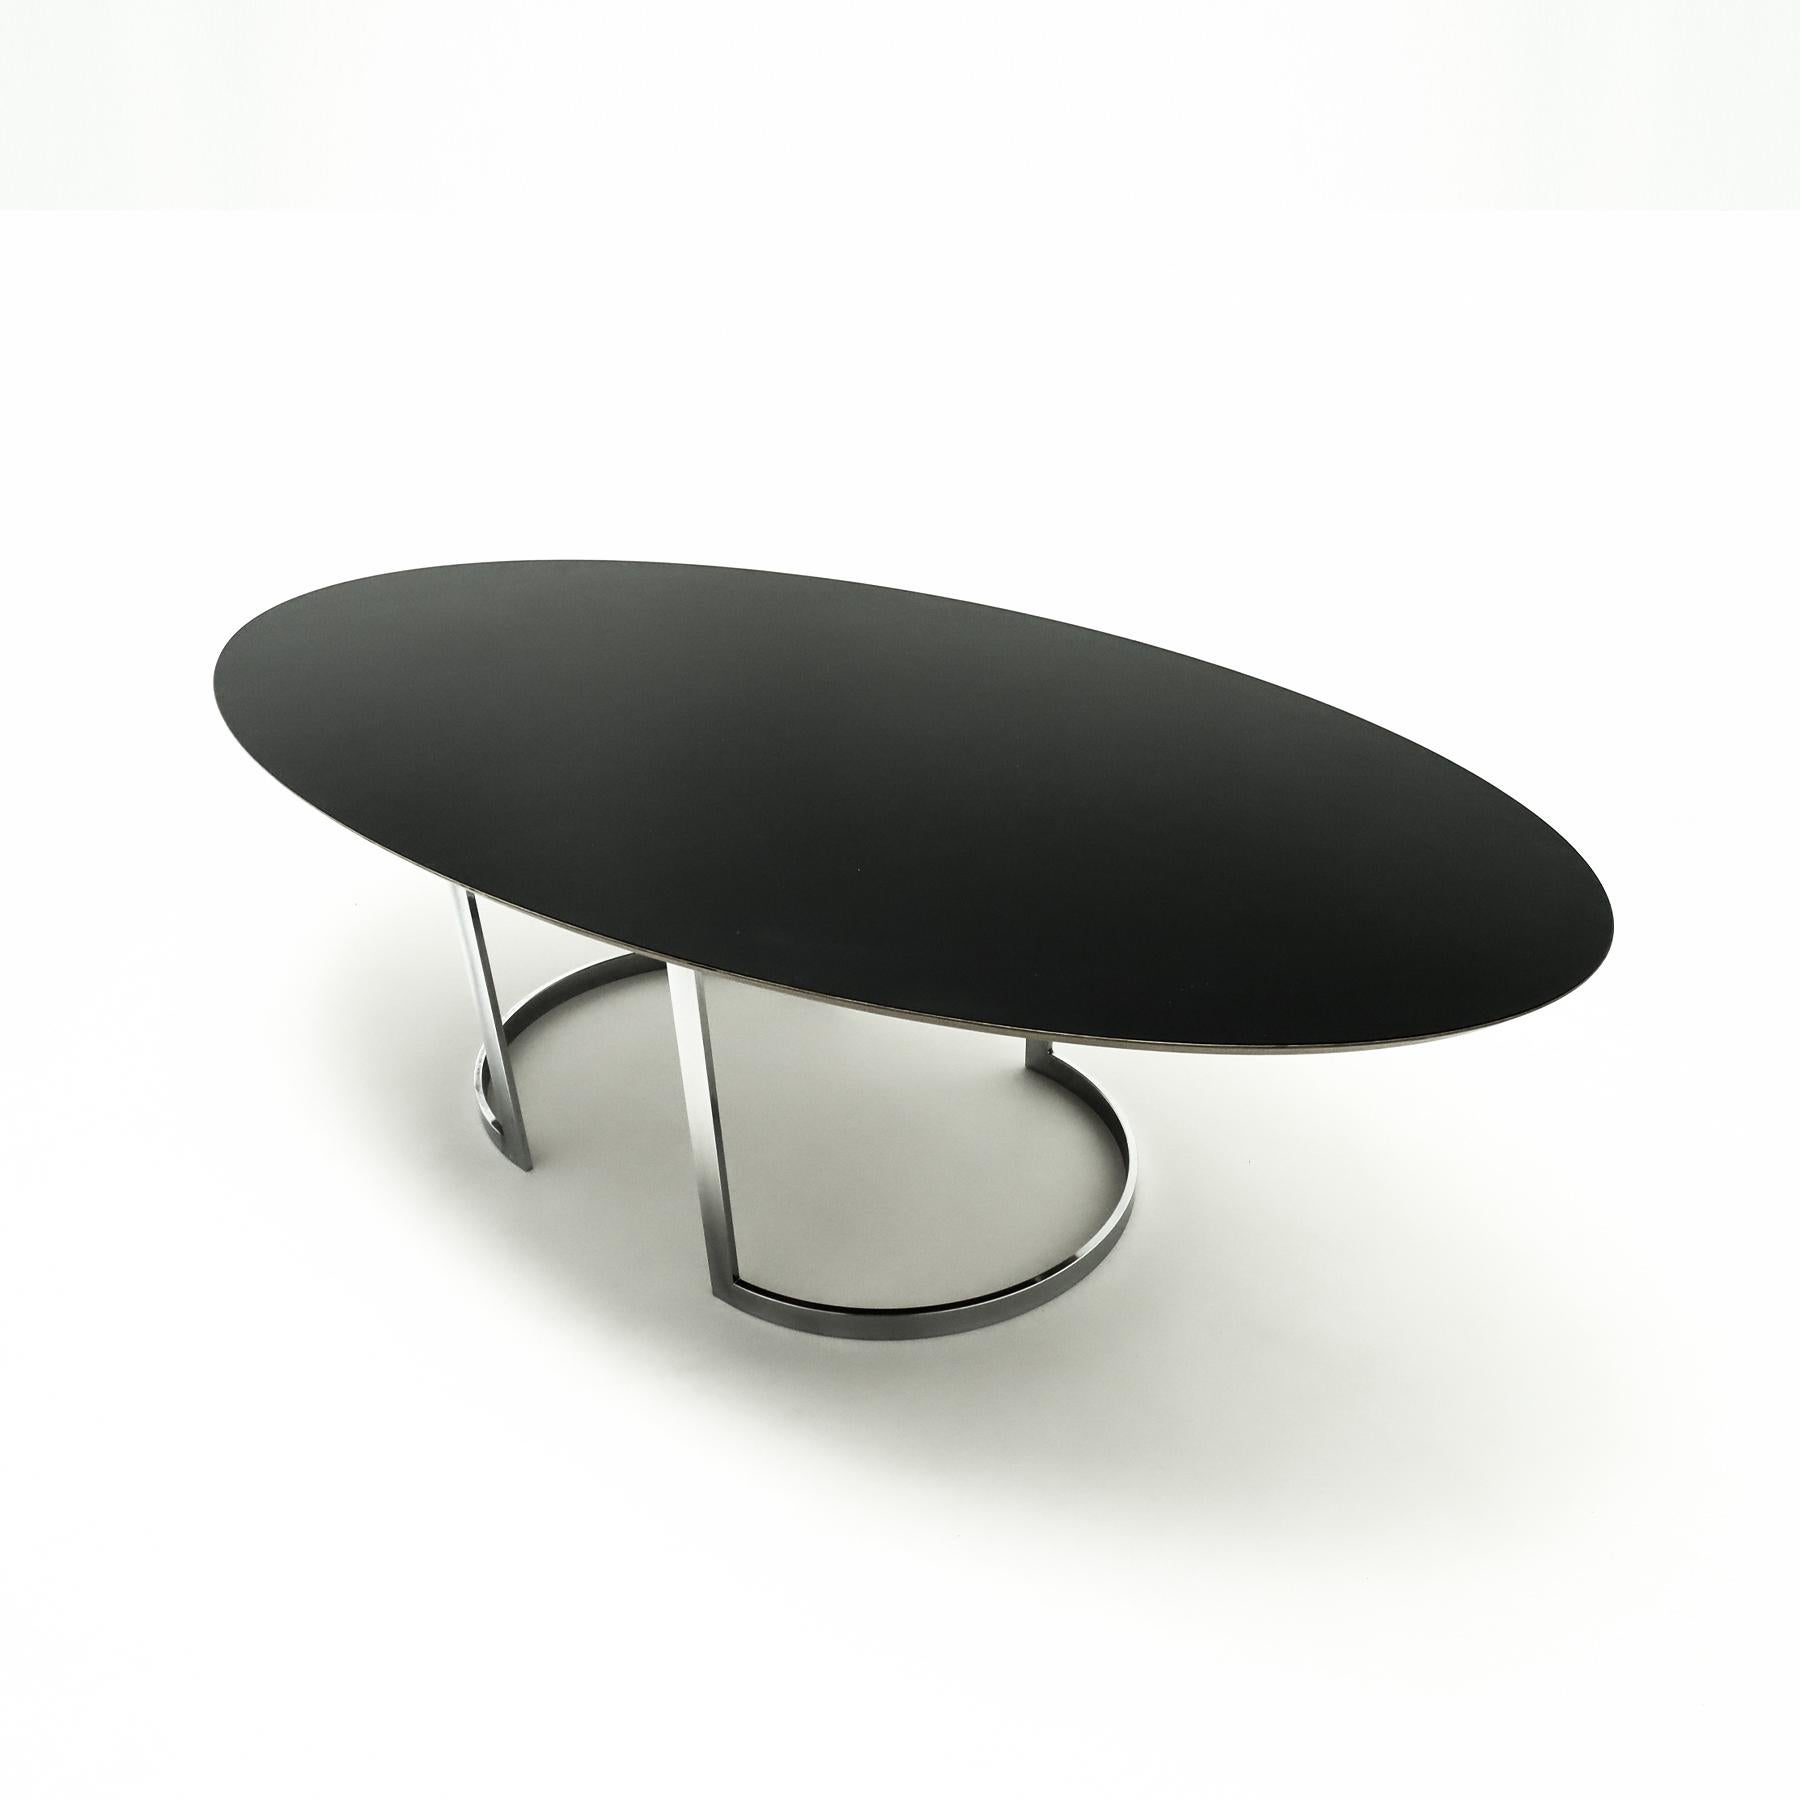 Large black and chrome 8 seat office meeting room, or conference room table in the style of Milo Baughman.

This large oval table is constructed from thick plywood that features a pressure treated black melamine top sat on two chrome bases. The